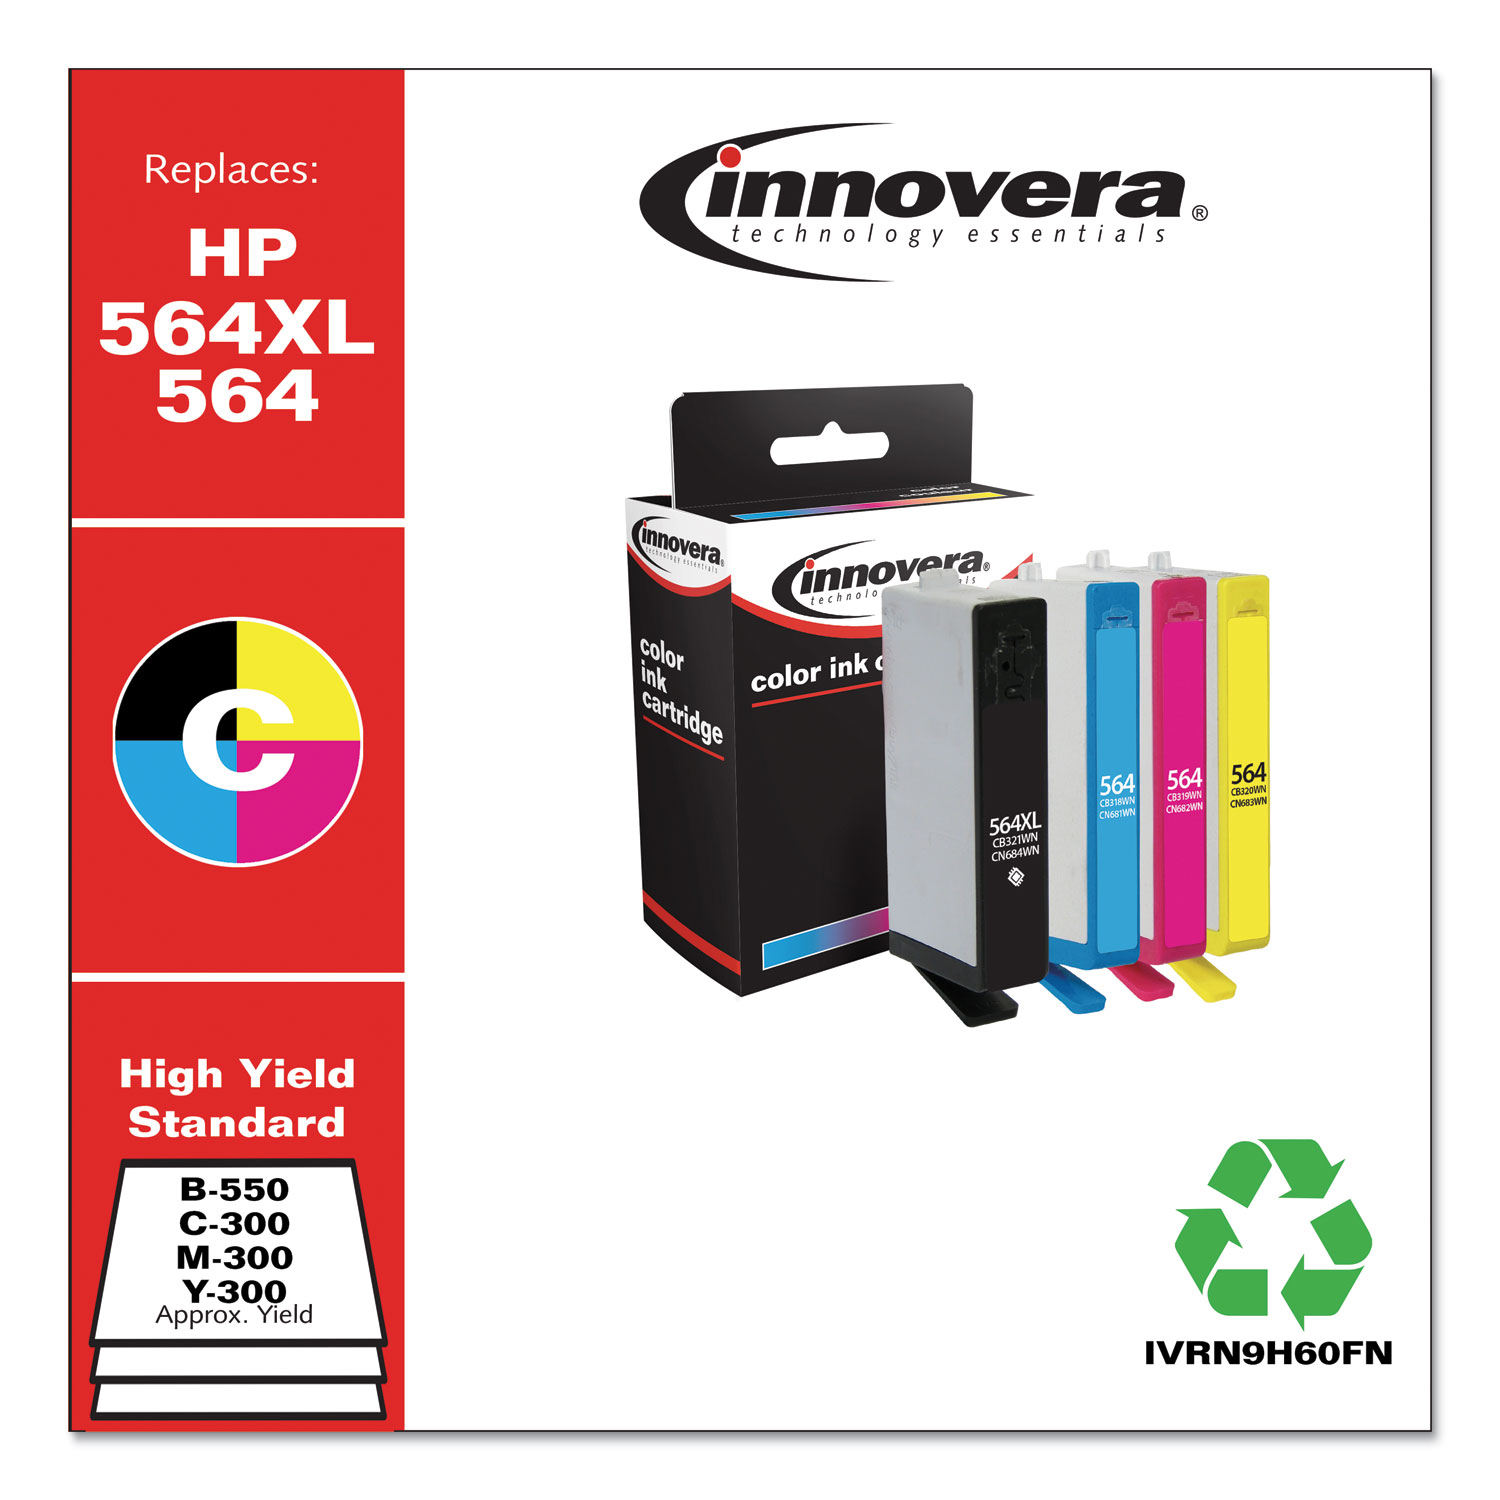  Innovera IVRN9H60FN Remanufactured Black/Cyan/Magenta/Yellow Ink, Replacement for HP 564XL/564 (N9H60FN), 550/300 Page-Yield (IVRN9H60FN) 